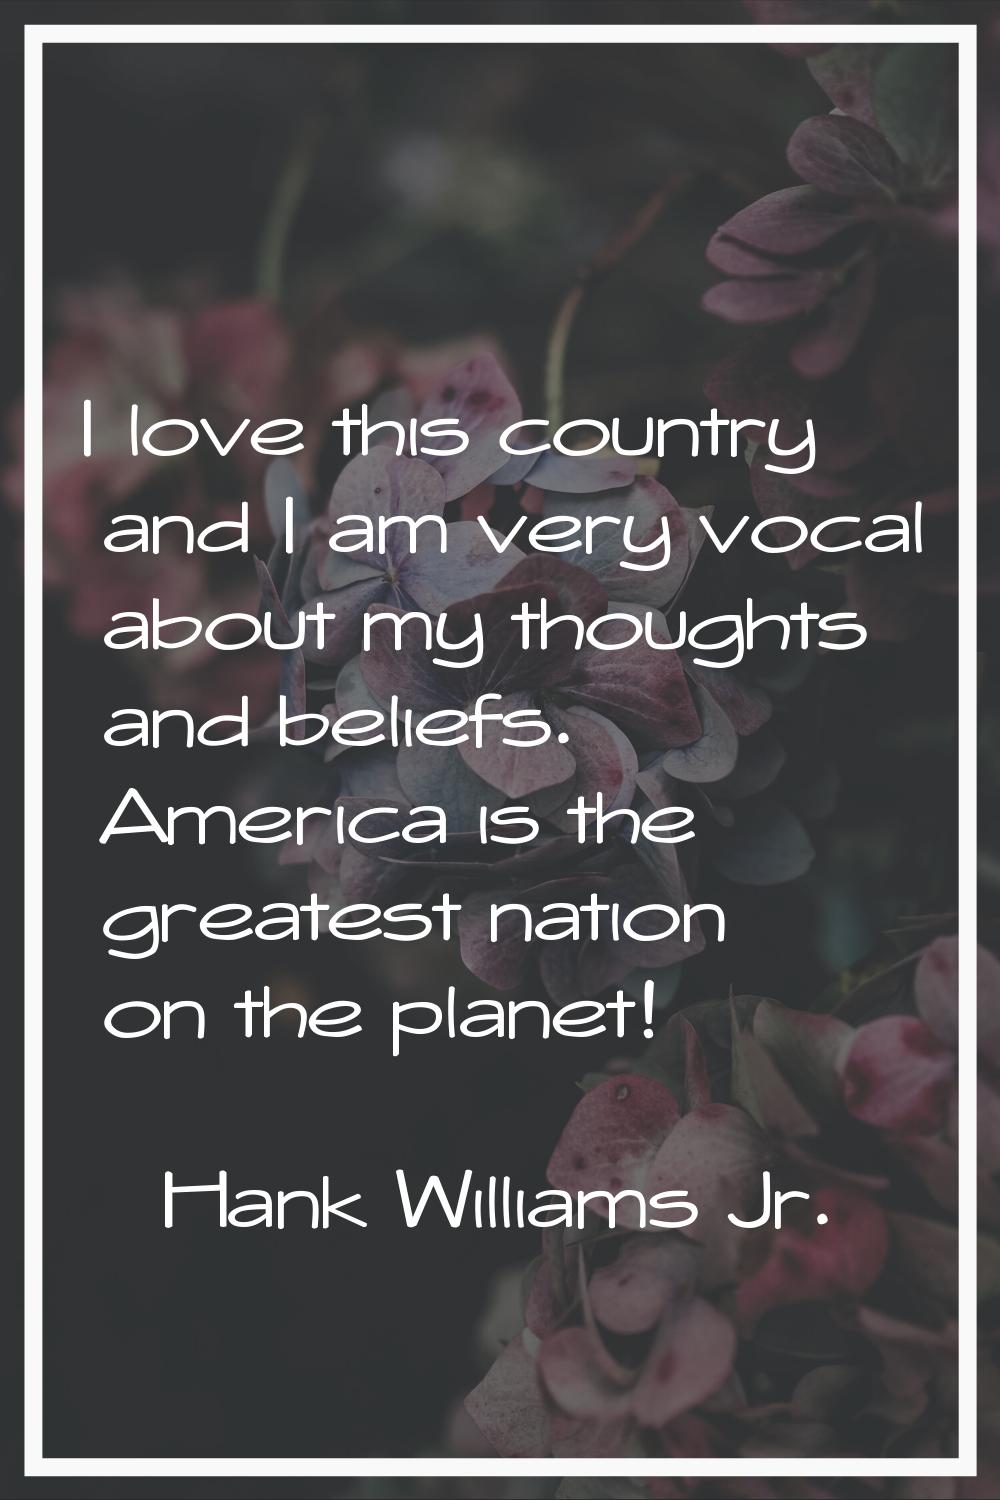 I love this country and I am very vocal about my thoughts and beliefs. America is the greatest nati